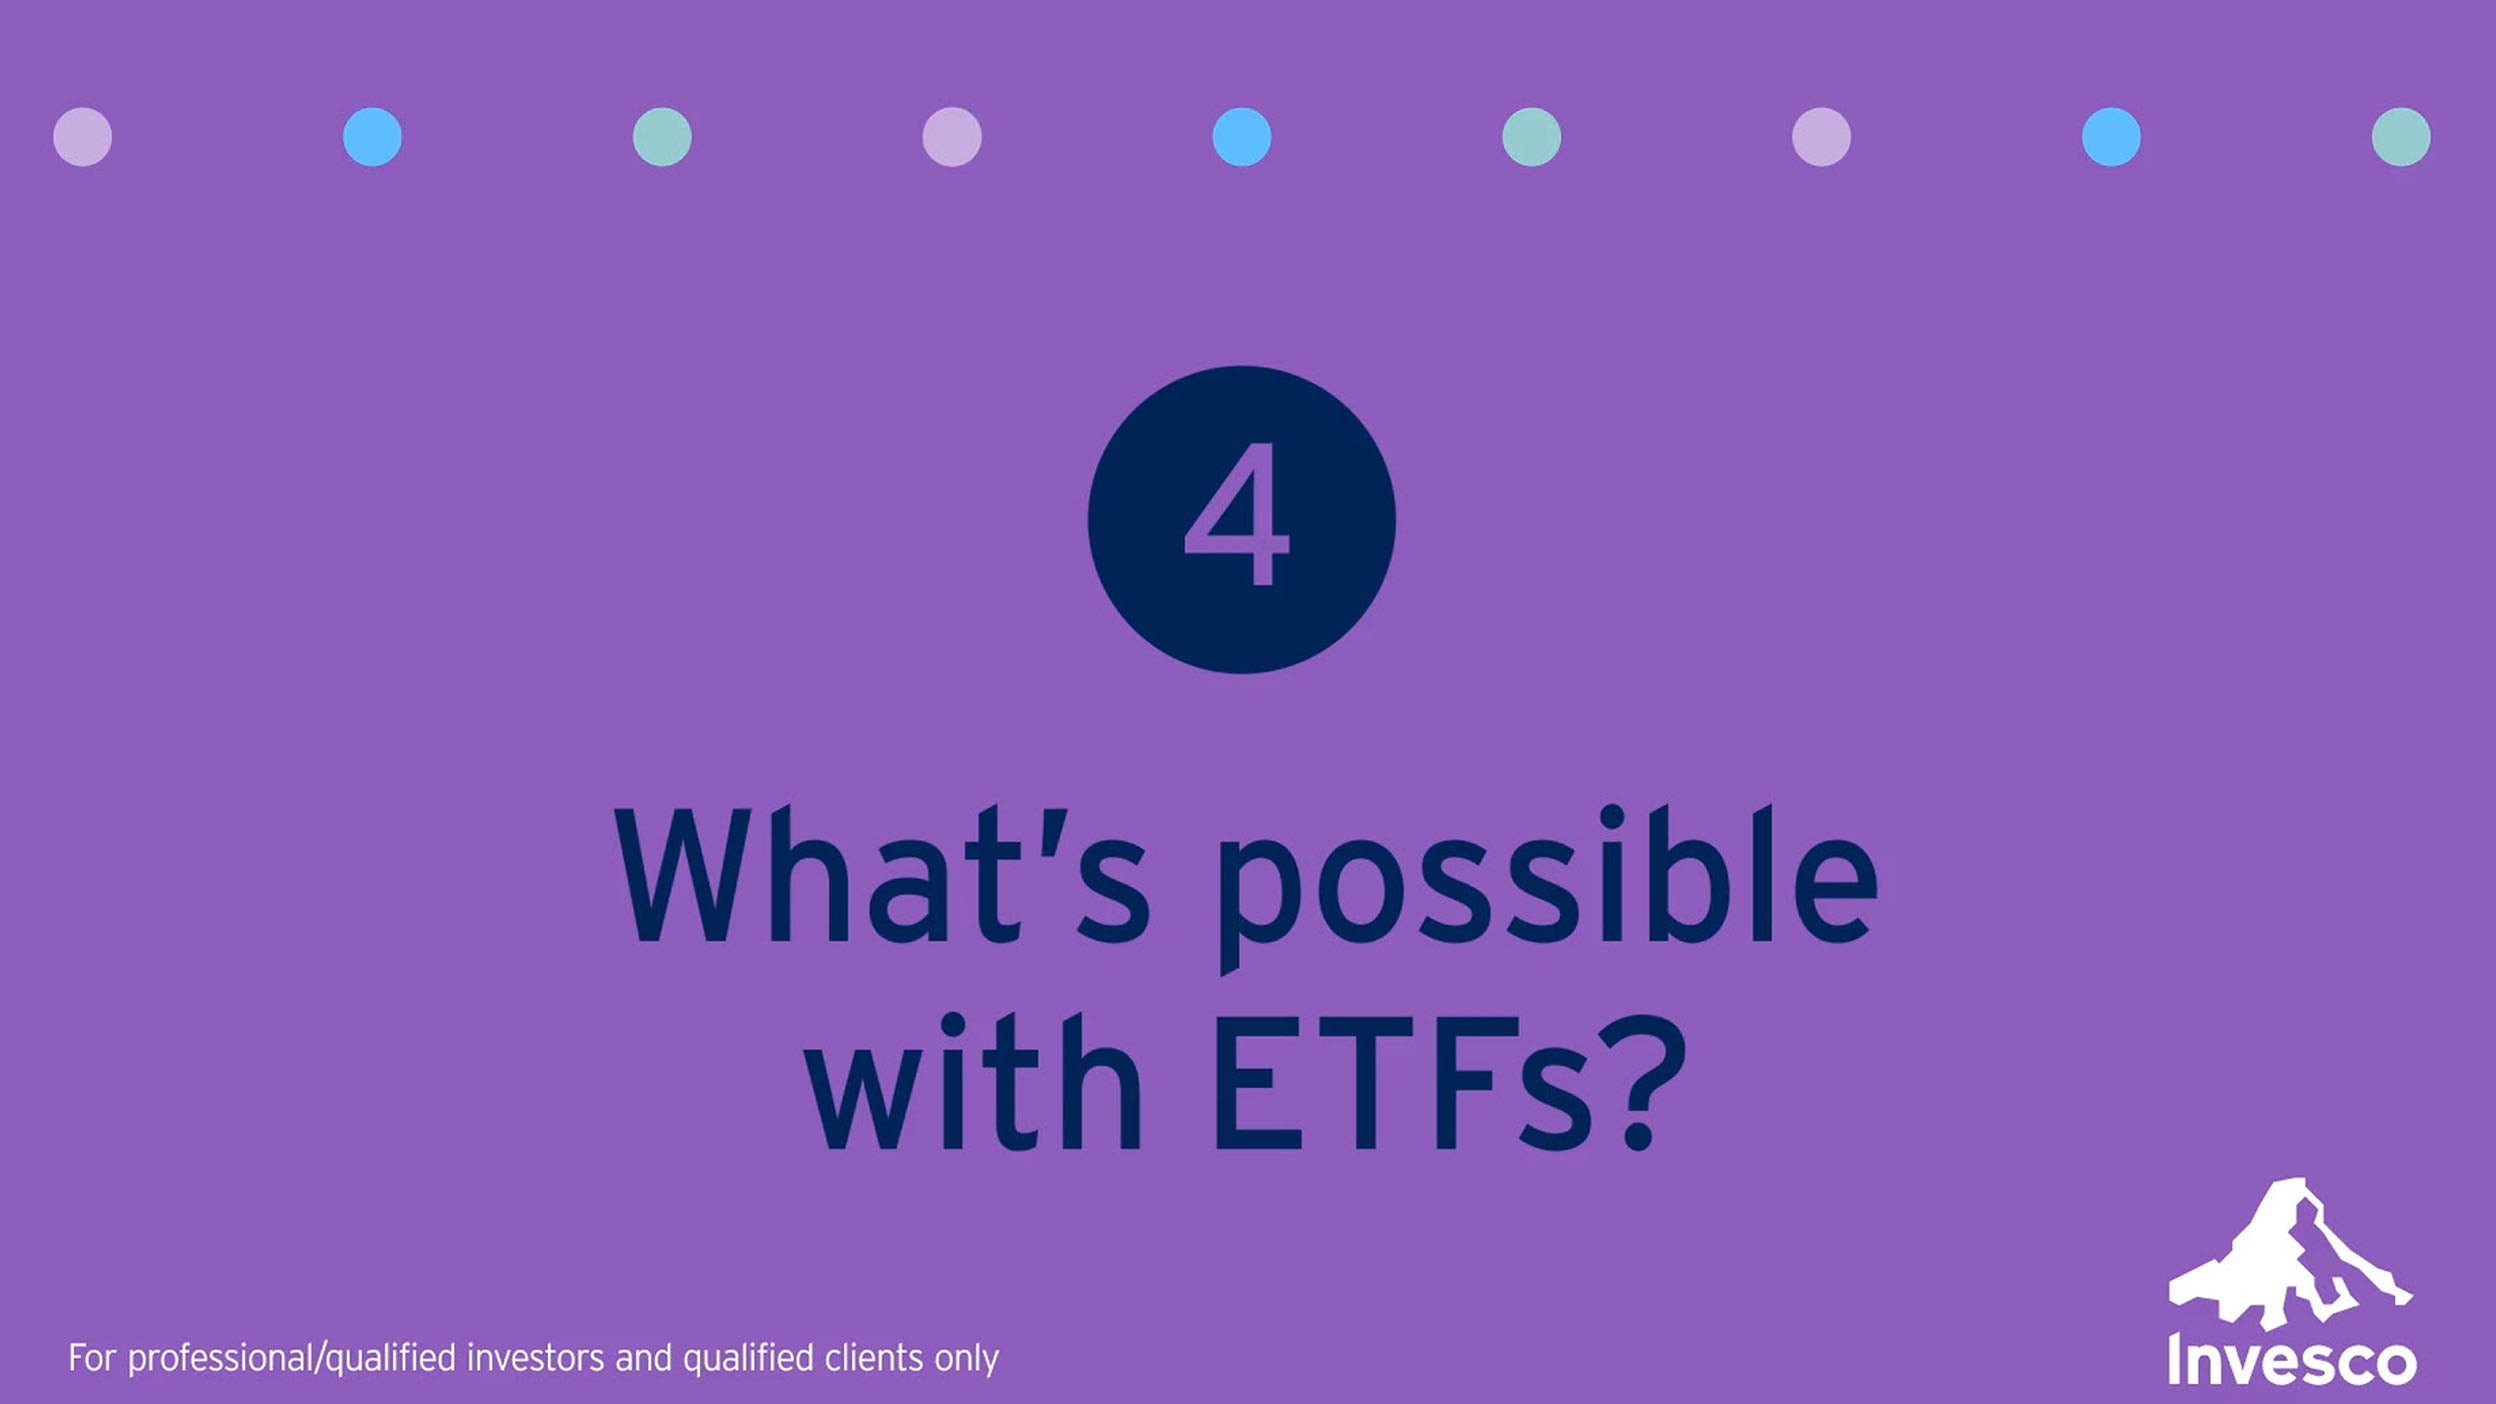 What's possible with ETFs?